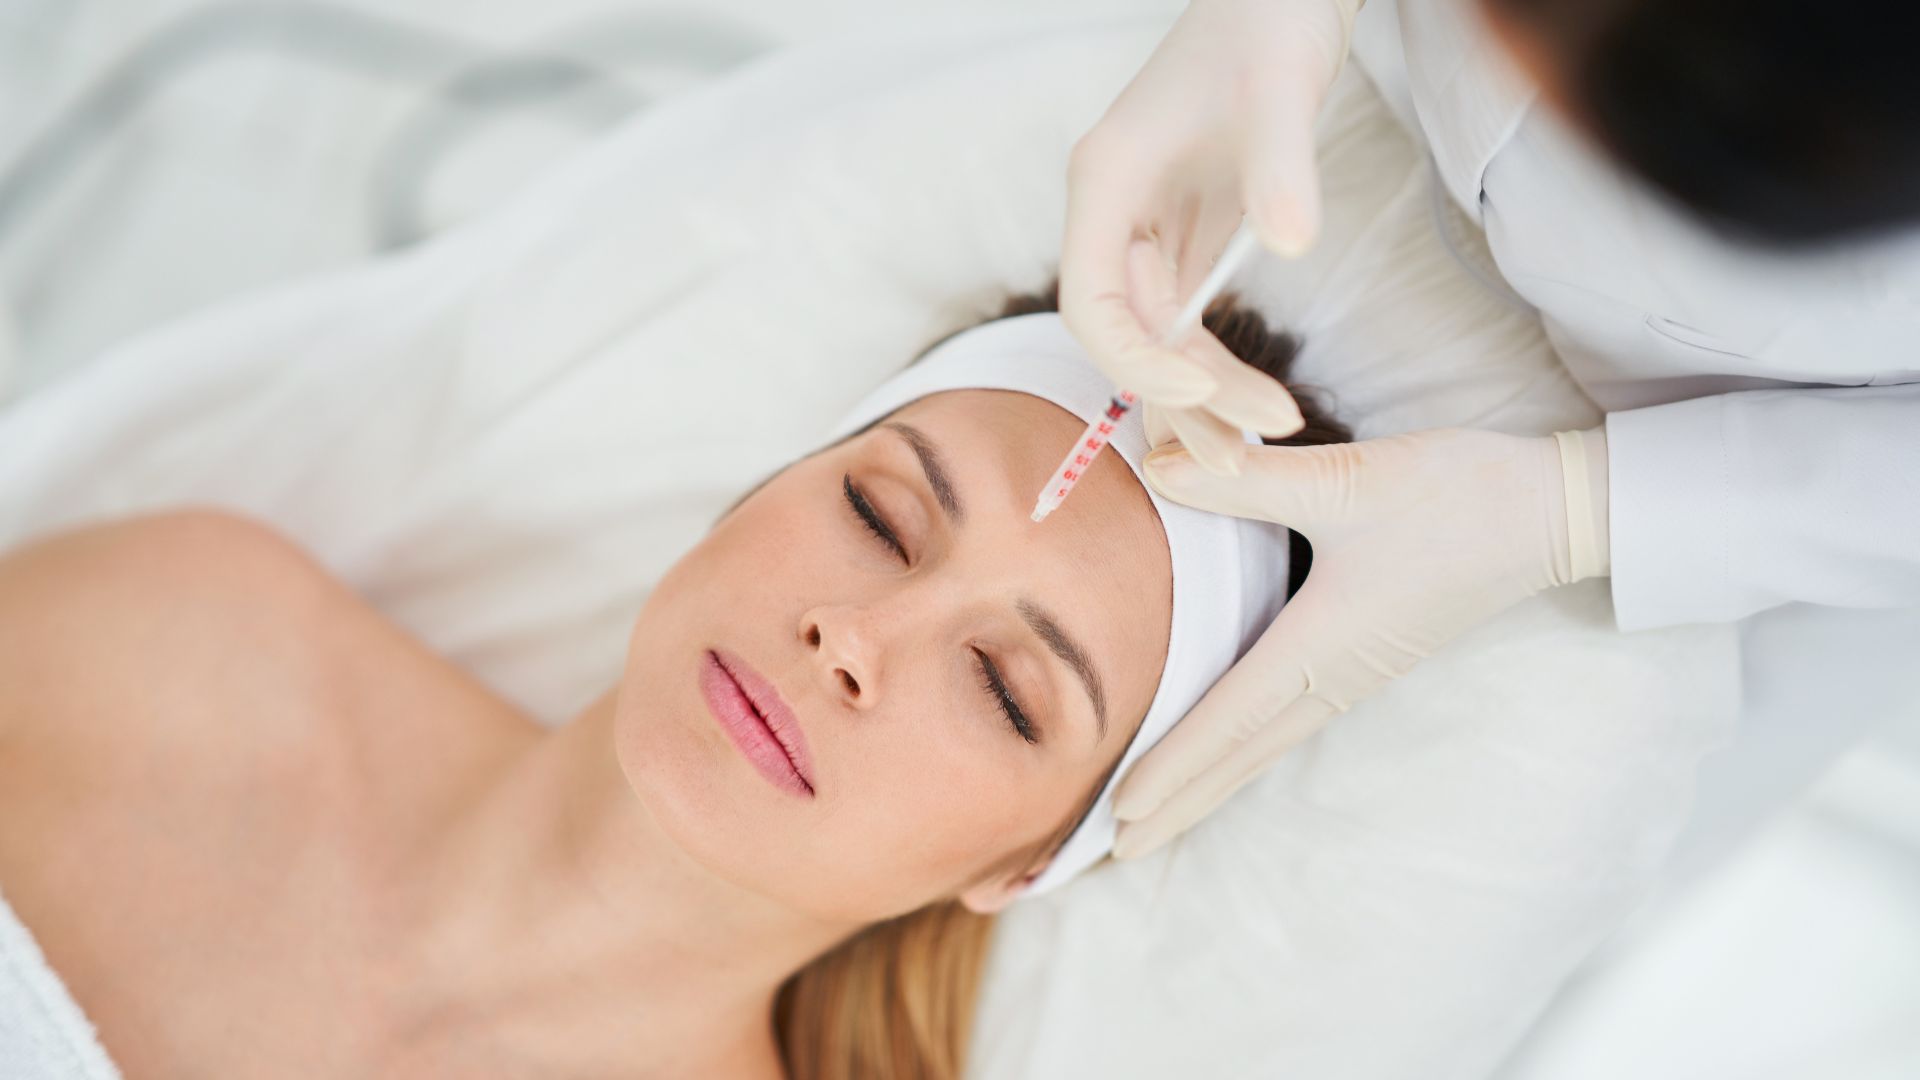 A Scene of Medical Cosmetology Treatments Botox Injection